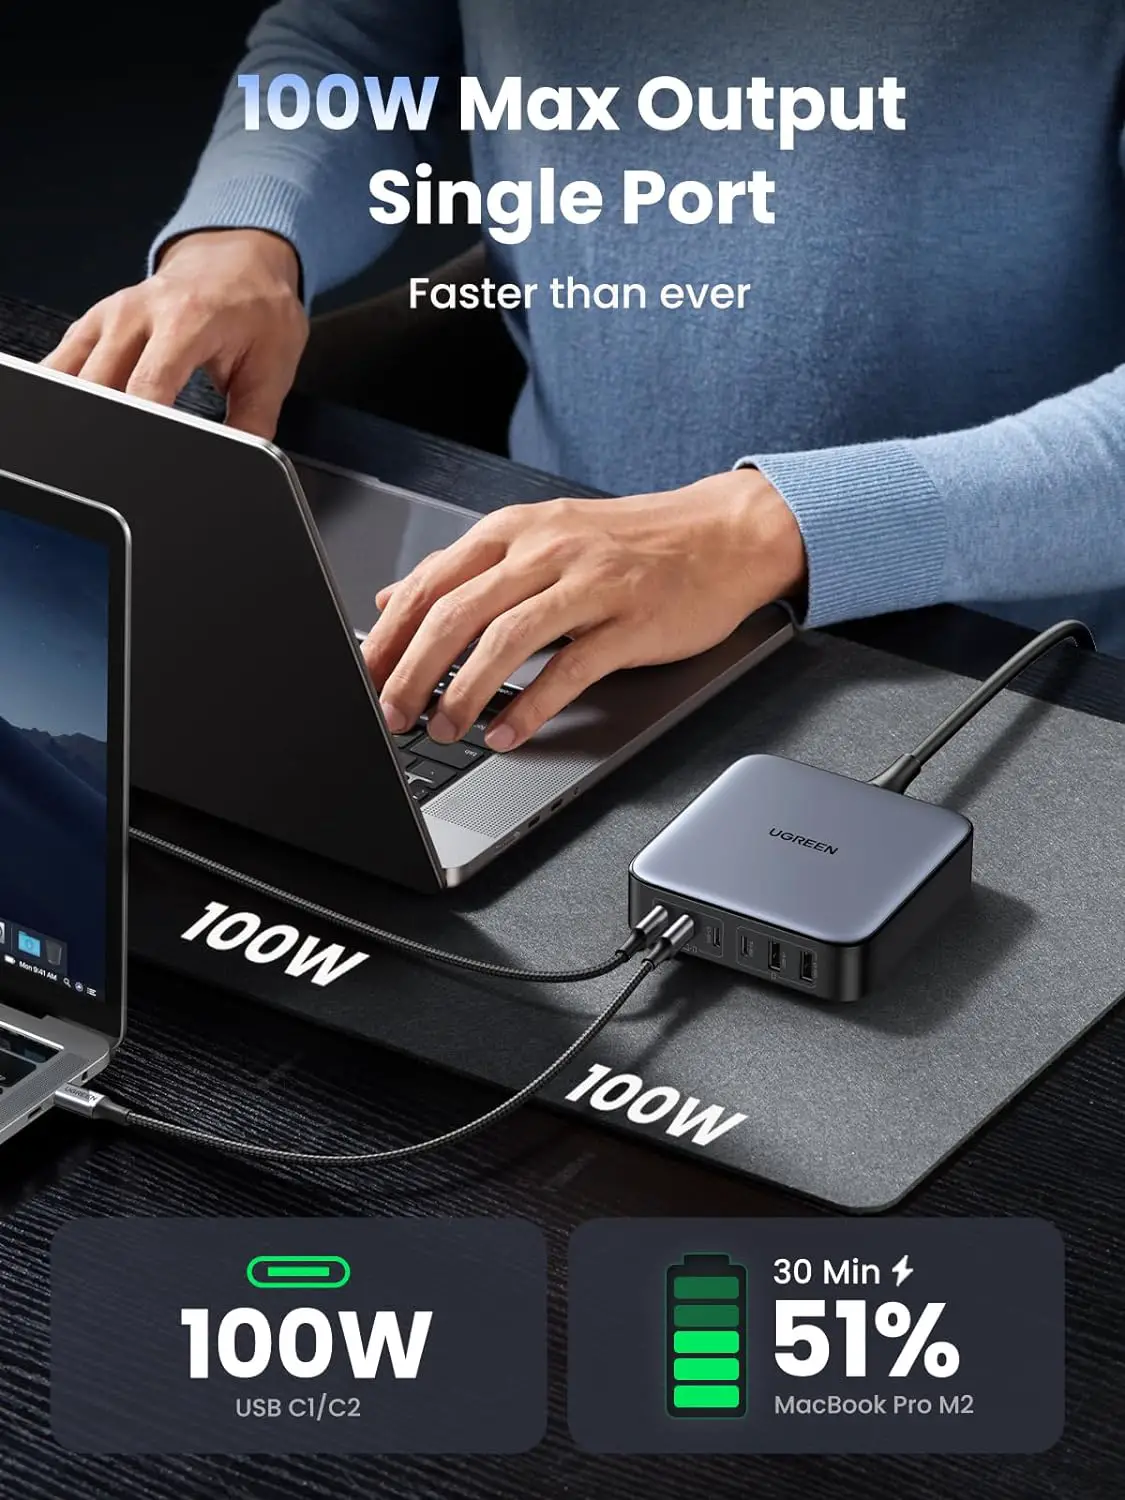 UGREEN 200W USB C Charger, Nexode 6 Ports GaN Desktop Charger, USB C Charging Station Compatible with MacBook Pro/Air M1 M2, iPad Pro/Air, iPhone 15 Pro Max/14, Galaxy S23 Ultra, Steam Deck, Dell XPS